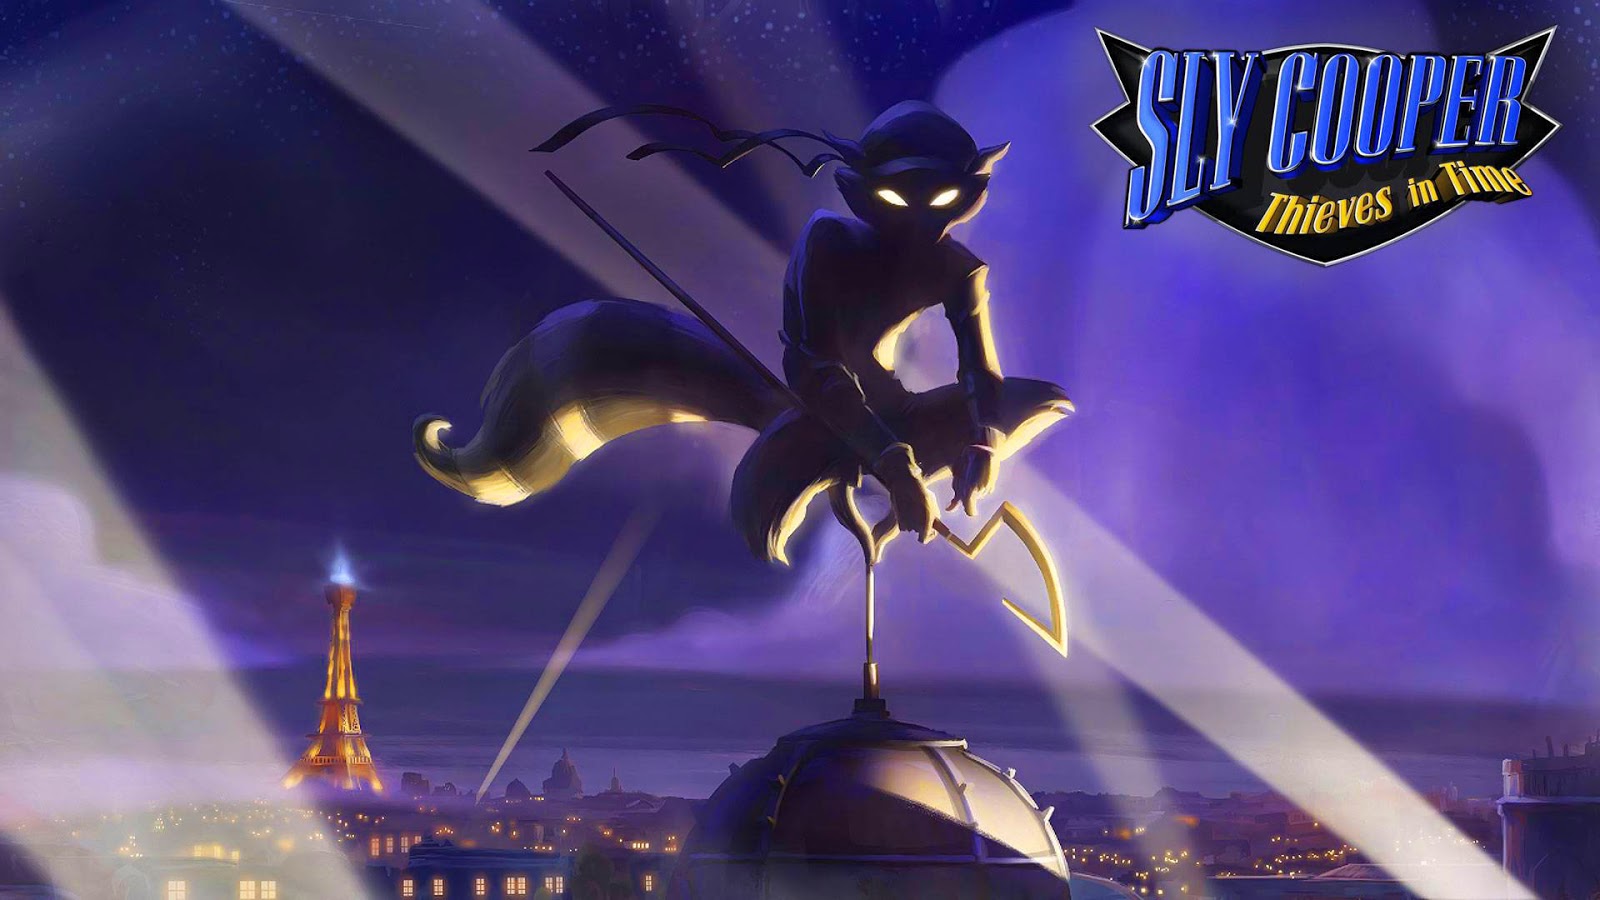 on the sly cooper picture sly cooper hd amp widescreen